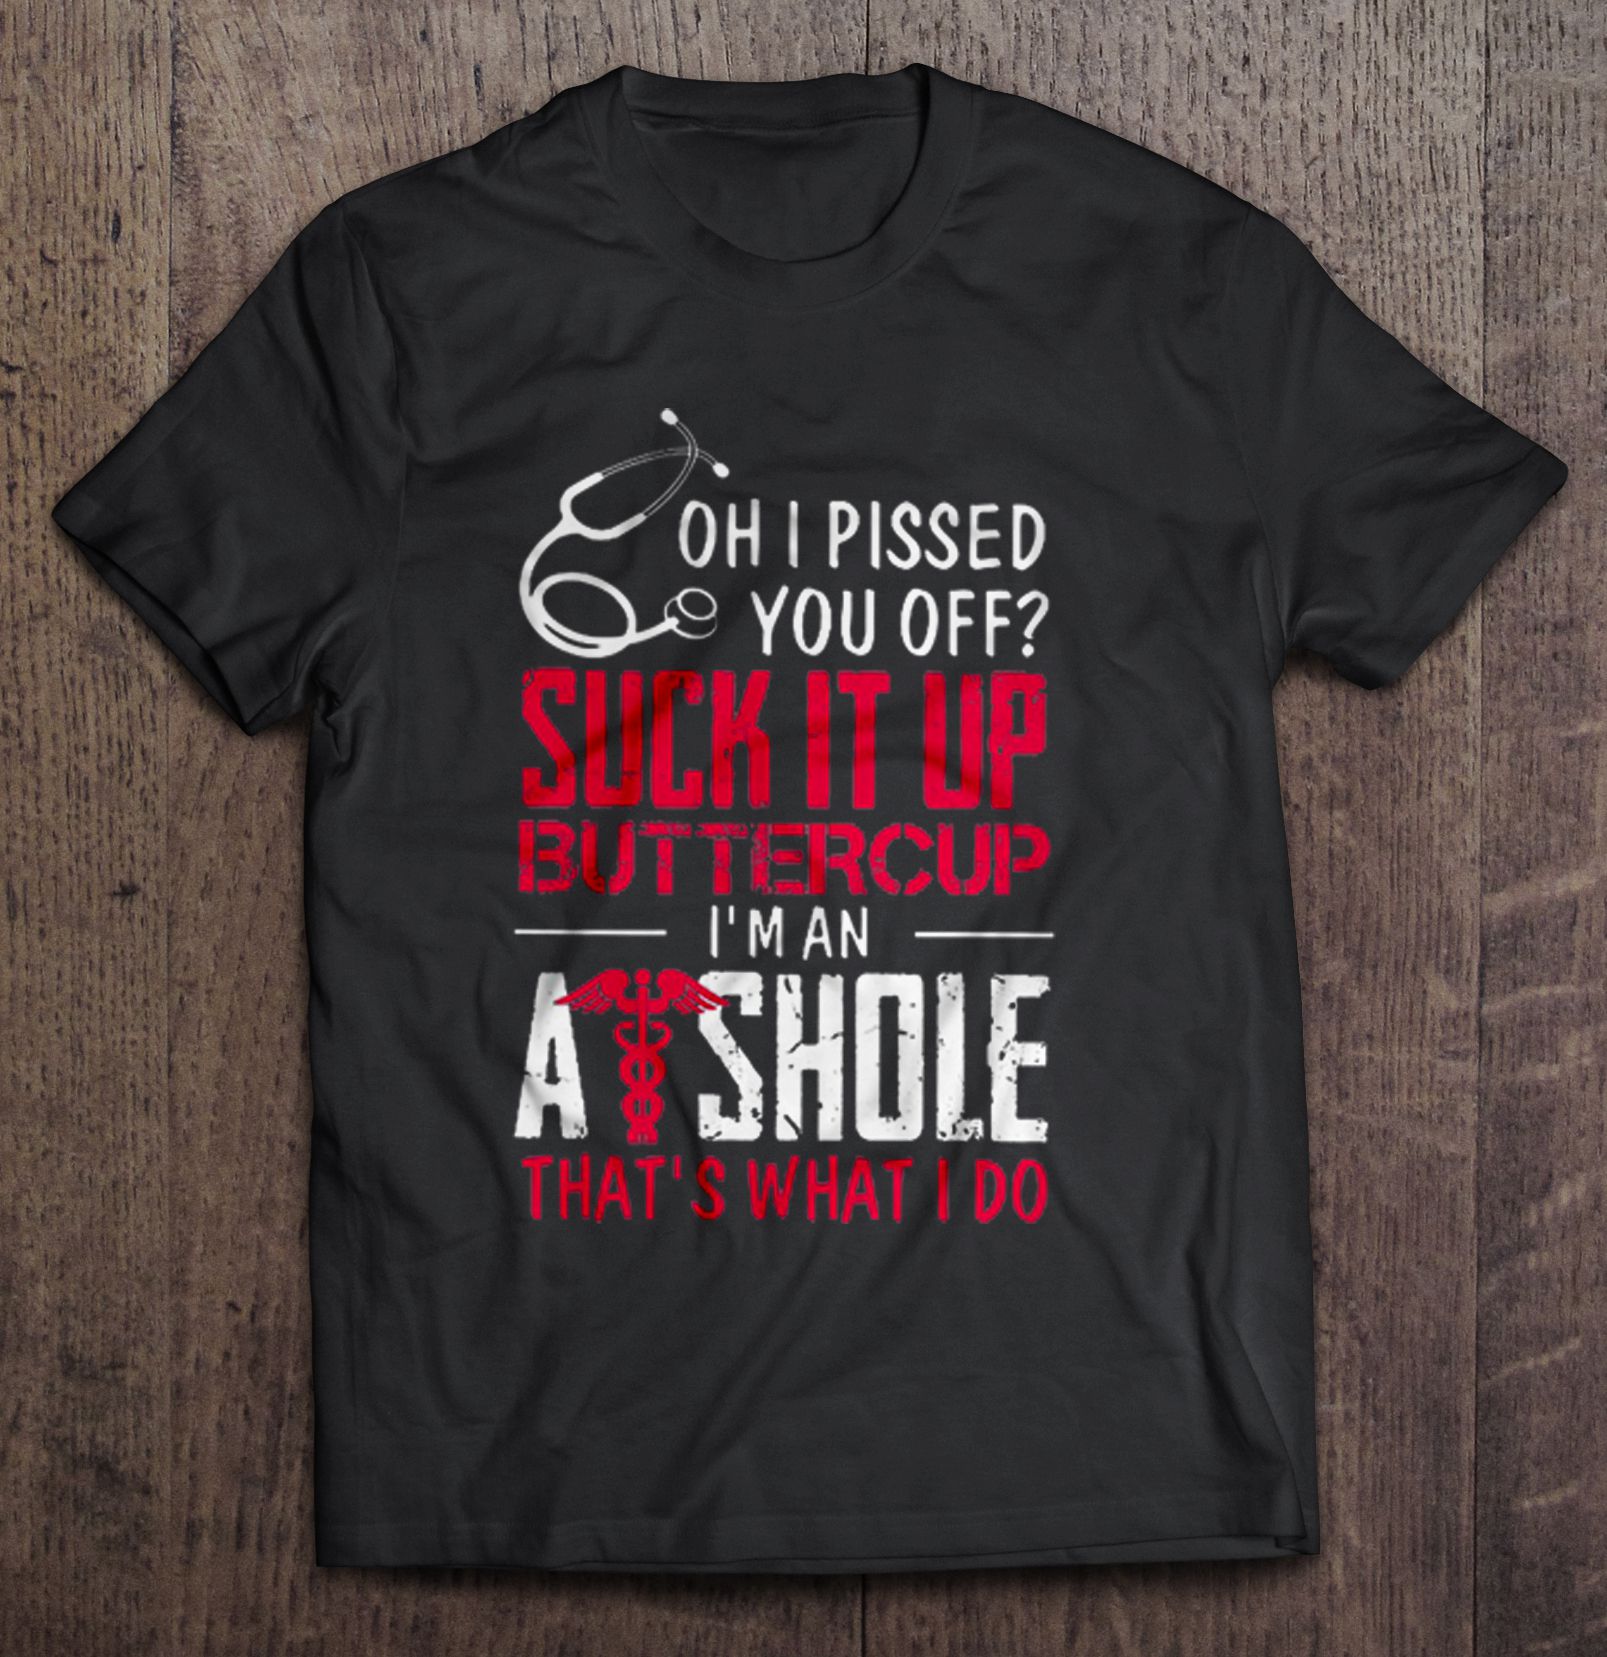 Oh I Pissed You Off Suck It Up Buttercup Im An Asshole Thats What I Do Nurse Version Shirt Gift Man Black Size Up To 5xl